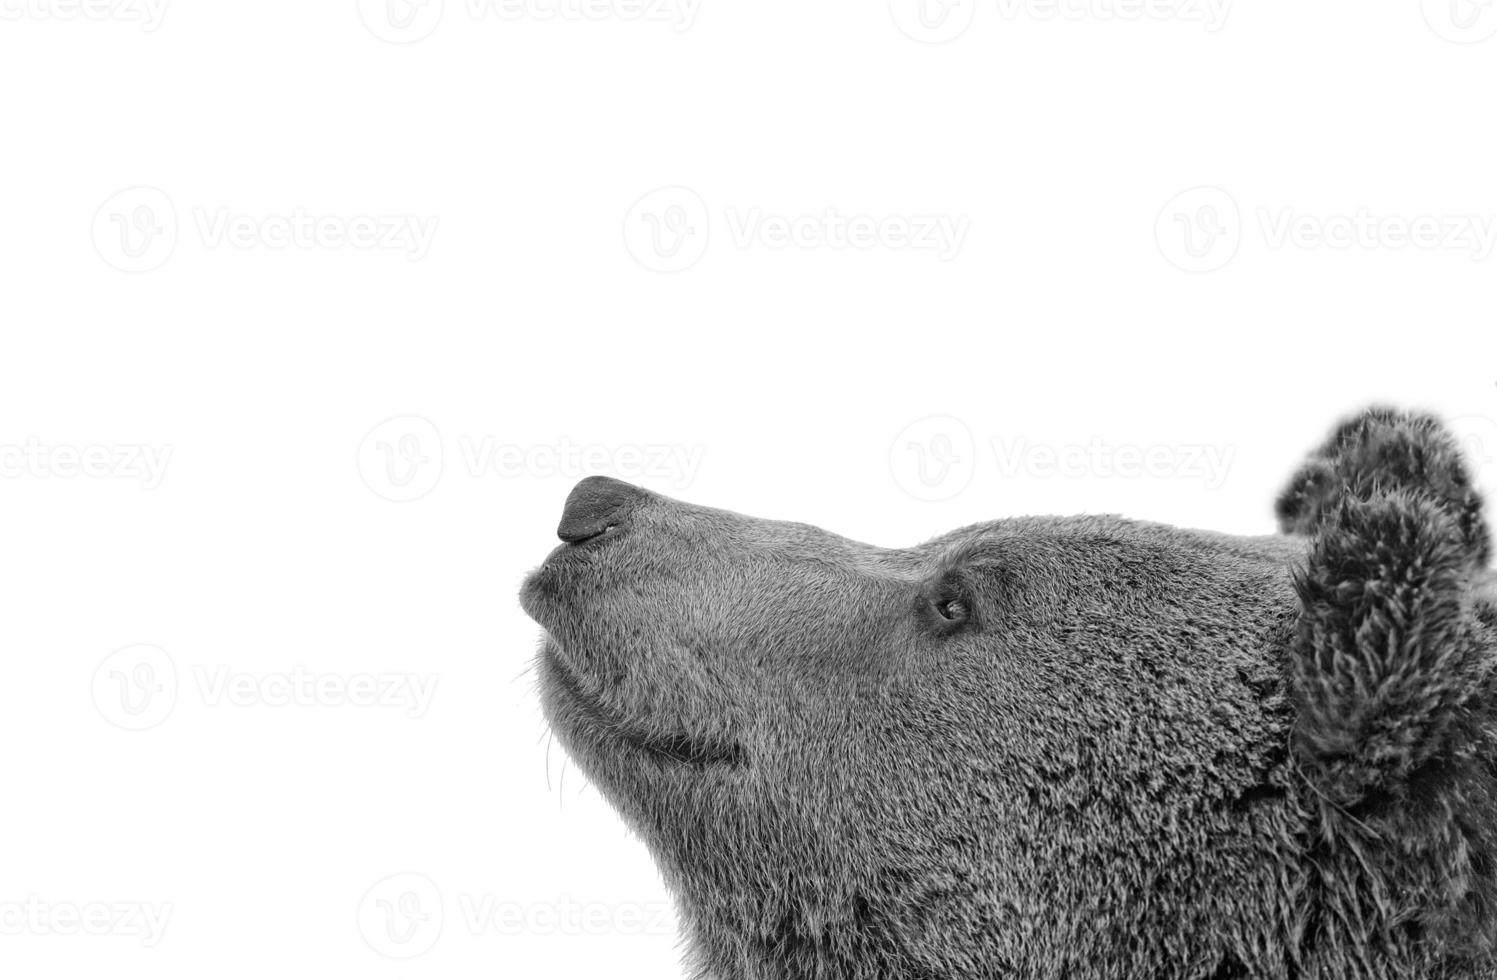 Black bear brown grizzly portrait in the snow while looking at you photo